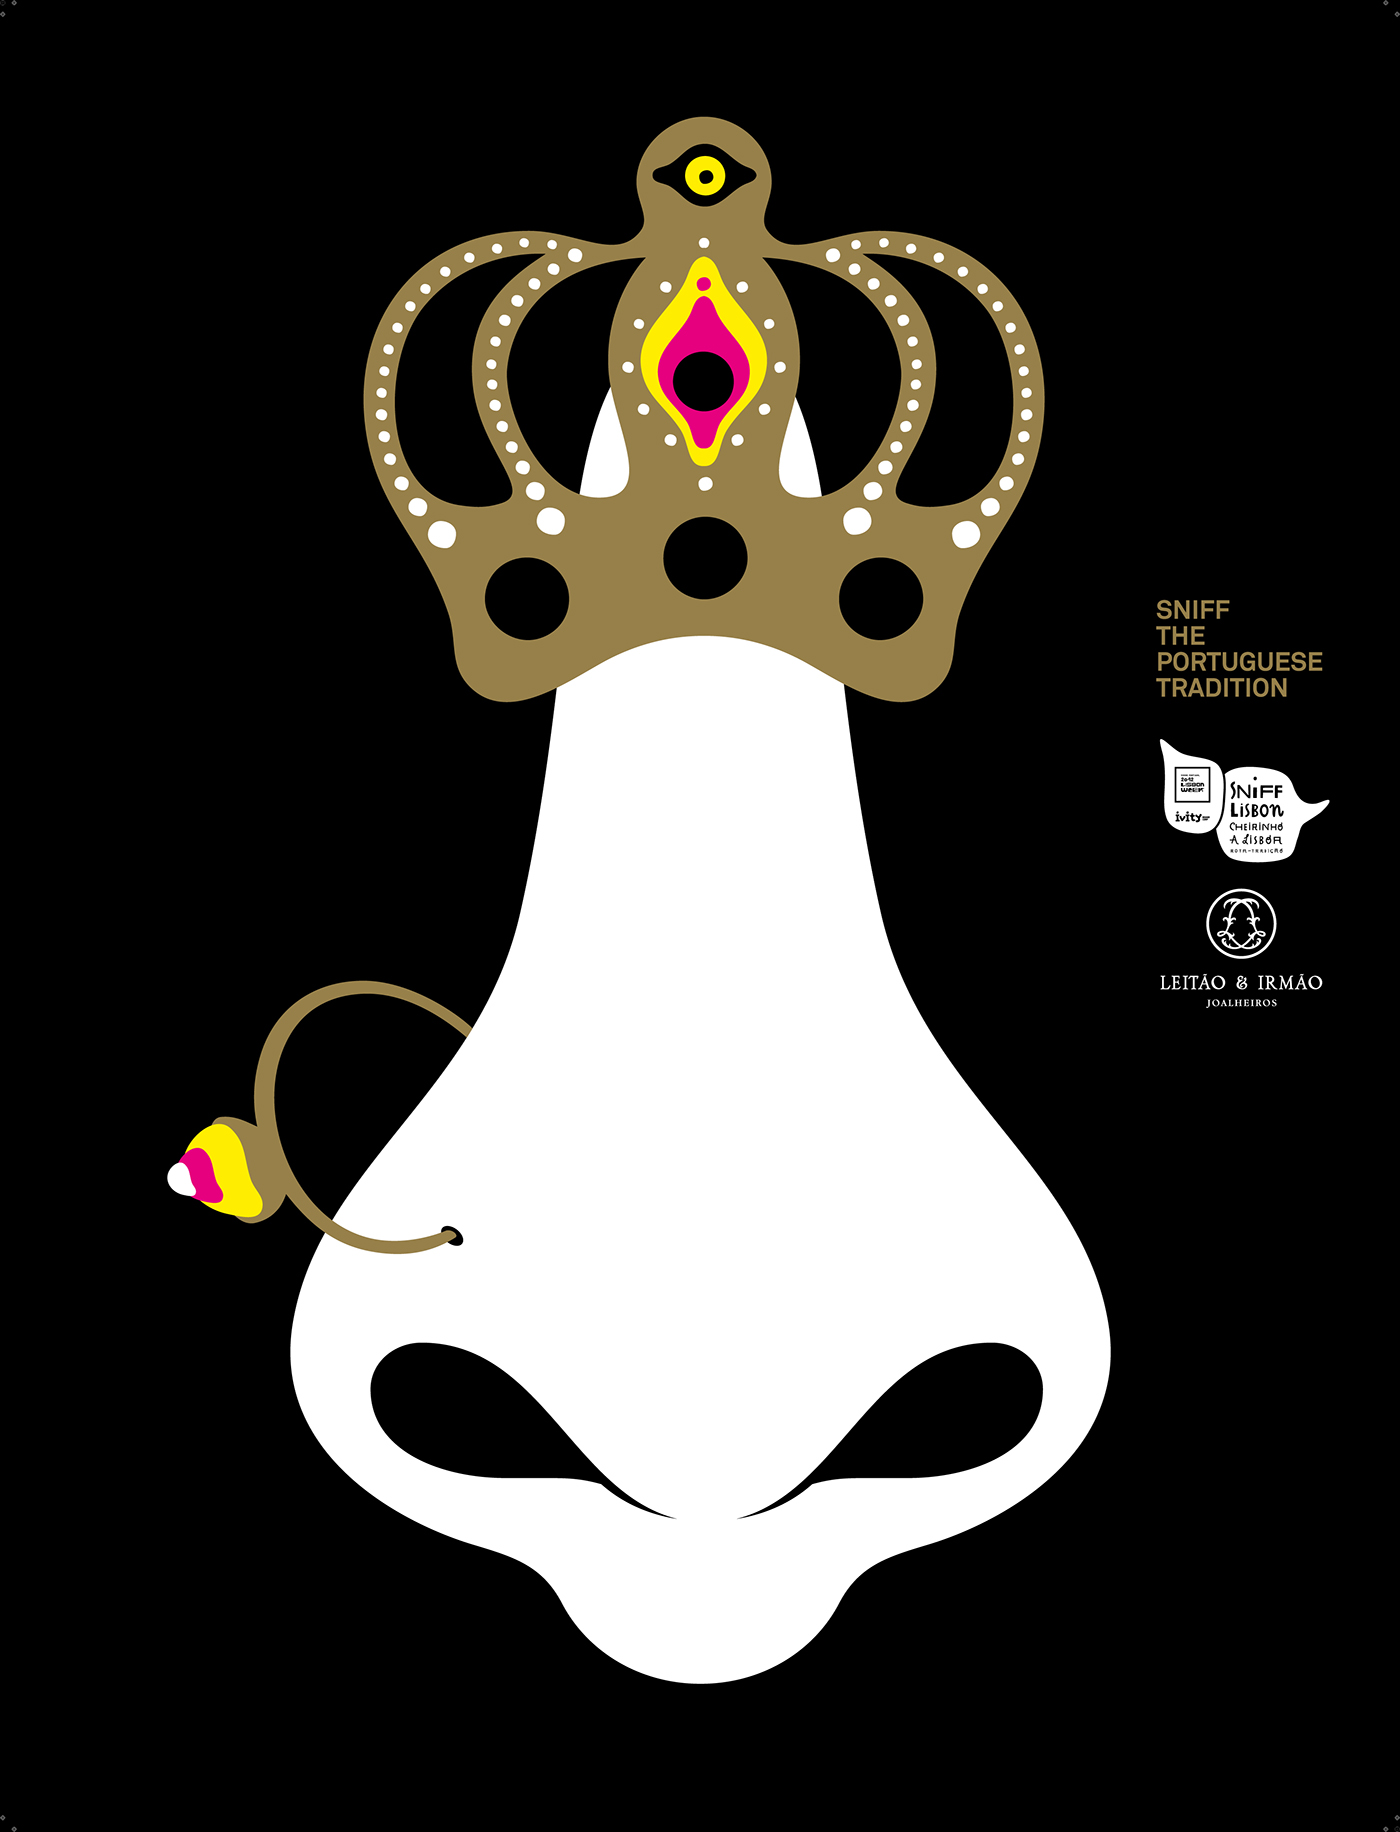 poster ILLUSTRATION  graphic design  nose kings Queens jewelry Leitão & irmao